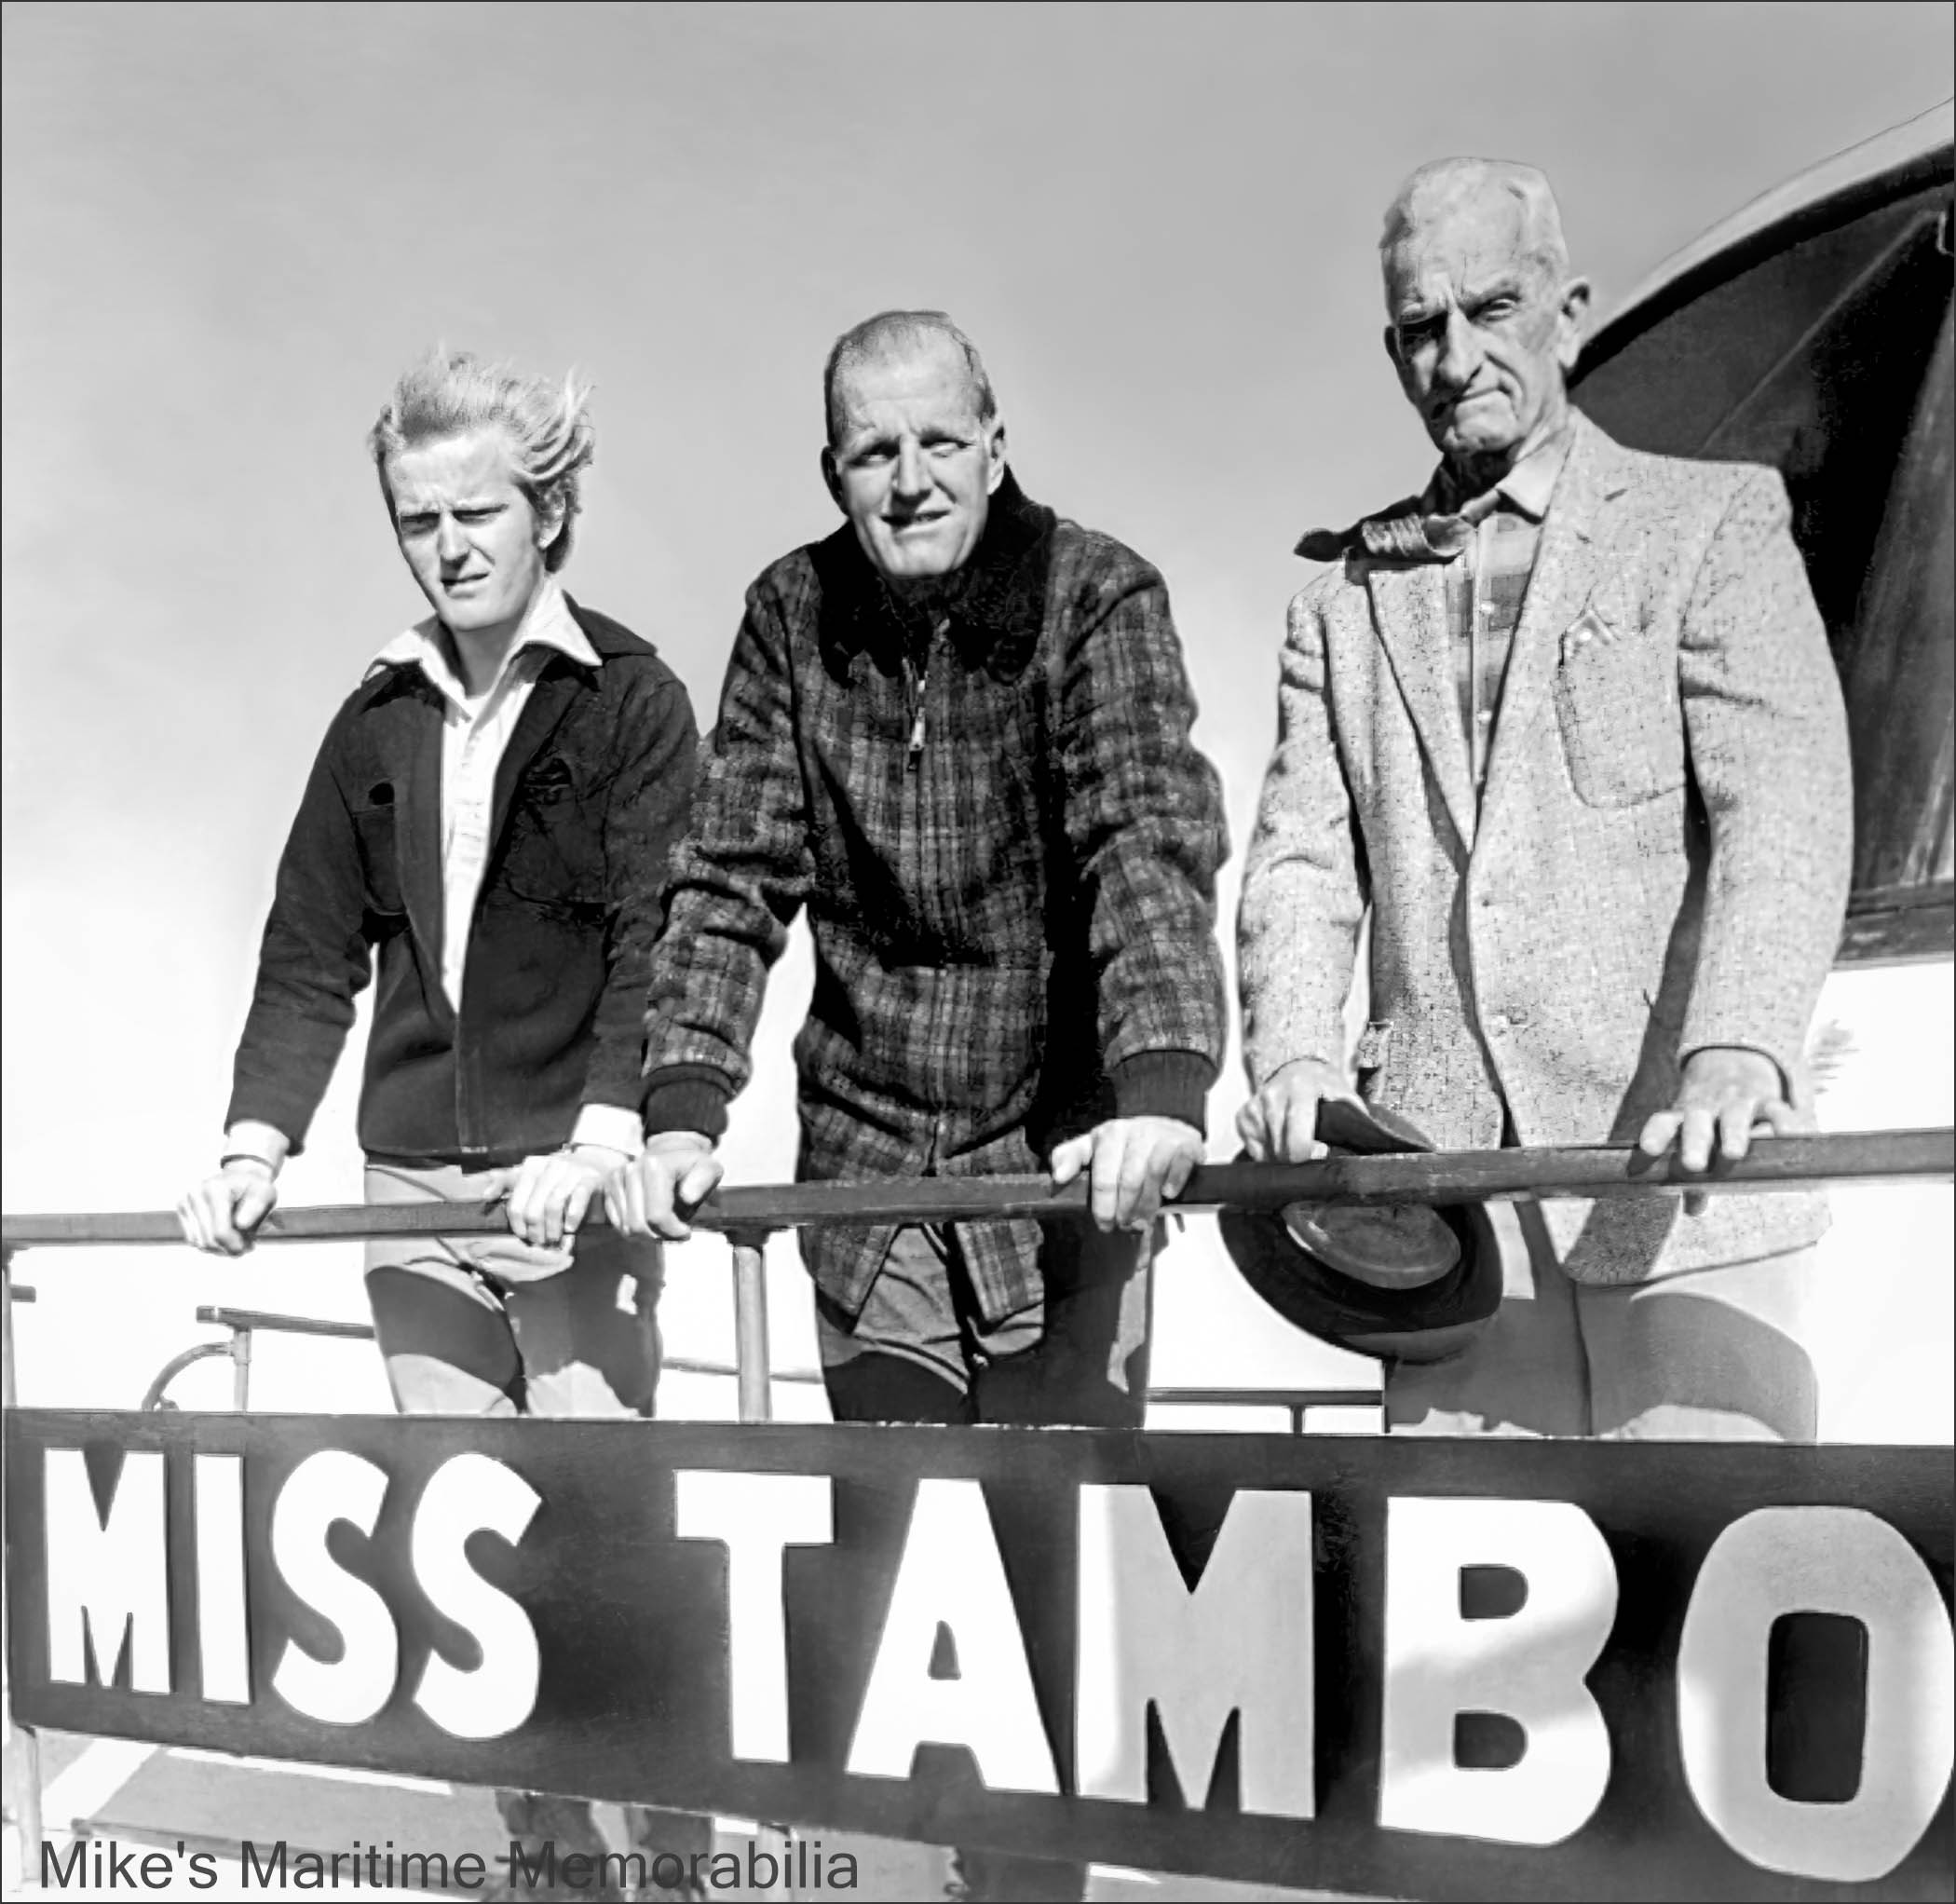 Three Captains Keefe, MISS TAMBO, Brielle, NJ – 1971 Three generations of Keefe family Captains. Standing aboard the "MISS TAMBO" at Brielle, NJ circa 1971 are, from left to right, Captains Ed Keefe Jr., Ed Keefe Sr. and John "Candy" Keefe. Captain "Candy" Keefe was a legend in the party boat industry and he got his nickname in 1904 (at the age of 14) when he began working as a candy vendor aboard the triple-decker sidewheeler steamboat "TAURUS". He went on to own and operate the "ADA L" from Sheepshead Bay and in 1923, began sailing the original "TAMBO" from Sheepshead Bay, Brooklyn, NY. In 1930, he had the "TAMBO III" built, and in 1936, he relocated the family business to Brielle, NJ. His son, Ed Keefe Sr. was the skipper of the charter boat "TAMBO V" from Brielle, NJ and took over the helm of the "TAMBO III" from his Dad in 1956. In 1962, the Gillikin built "MISS TAMBO" replaced the "TAMBO III". Ed Keefe Jr. mated aboard the "MISS TAMBO" until entering the U.S. Navy. Soon after completing his military service, Ed Jr. continued the family tradition and earned his captains license.